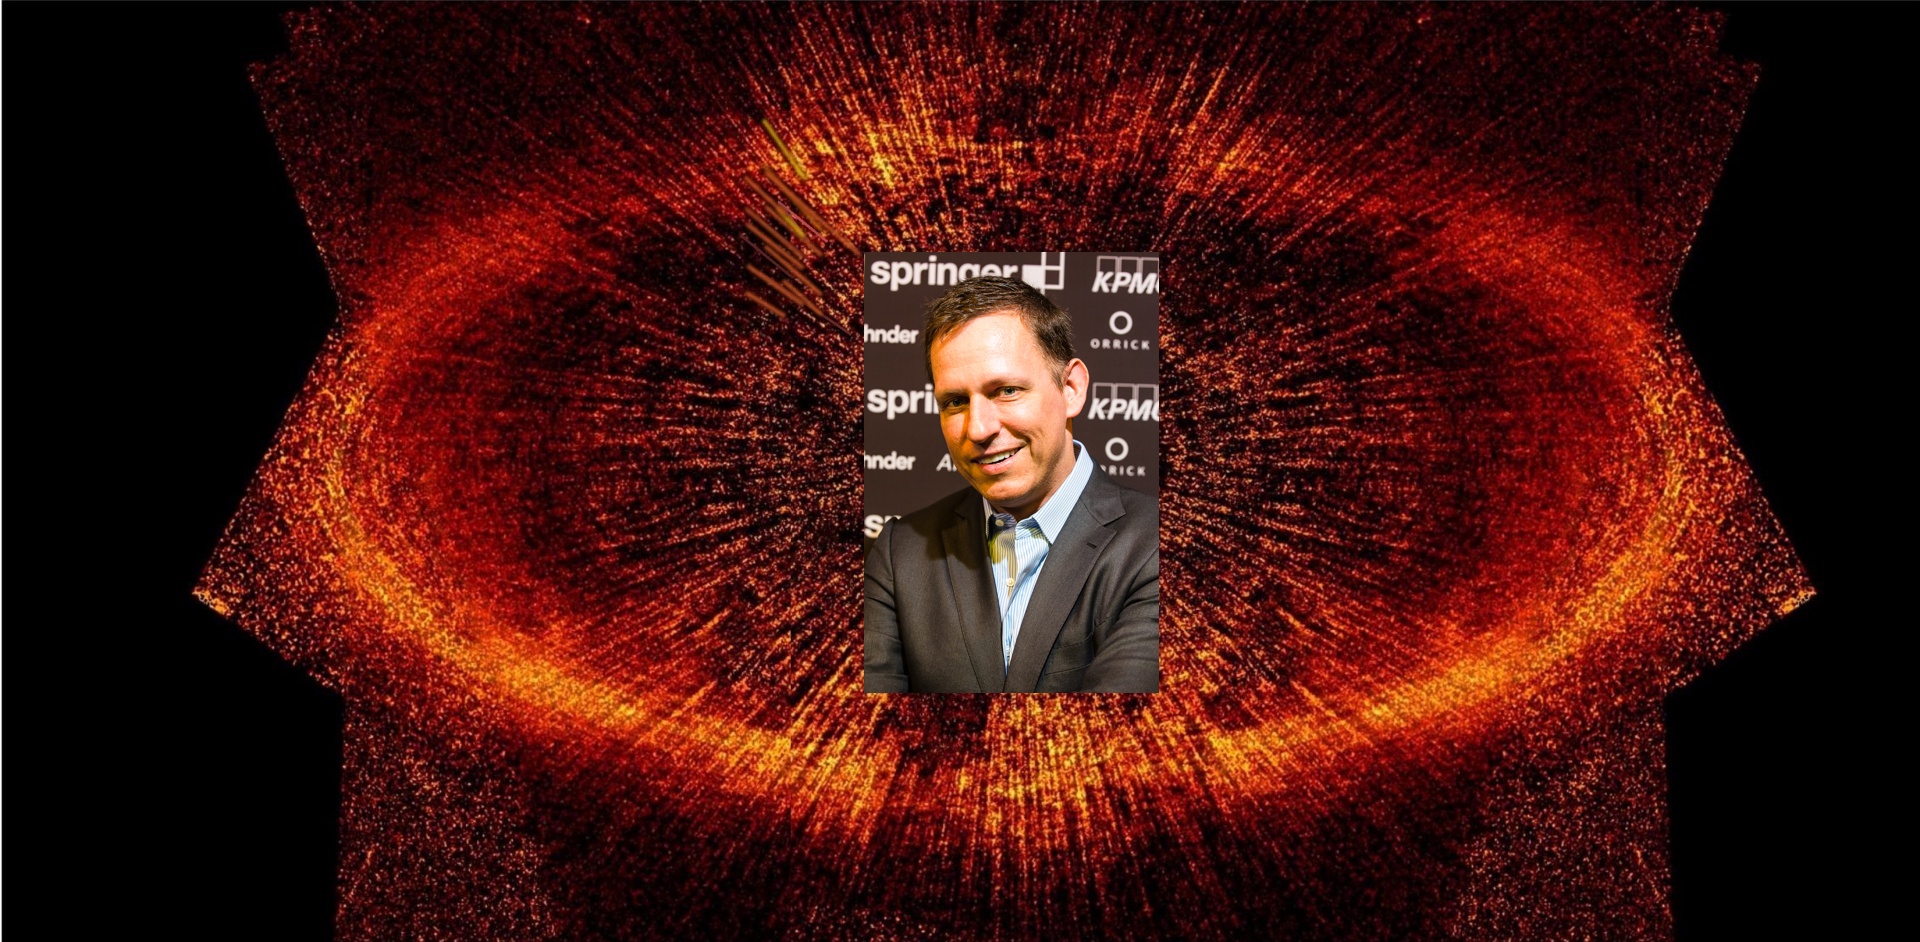 LOL: Peter Thiel: AI is "Leninist" and "literally communist" The-eye-of-sauron